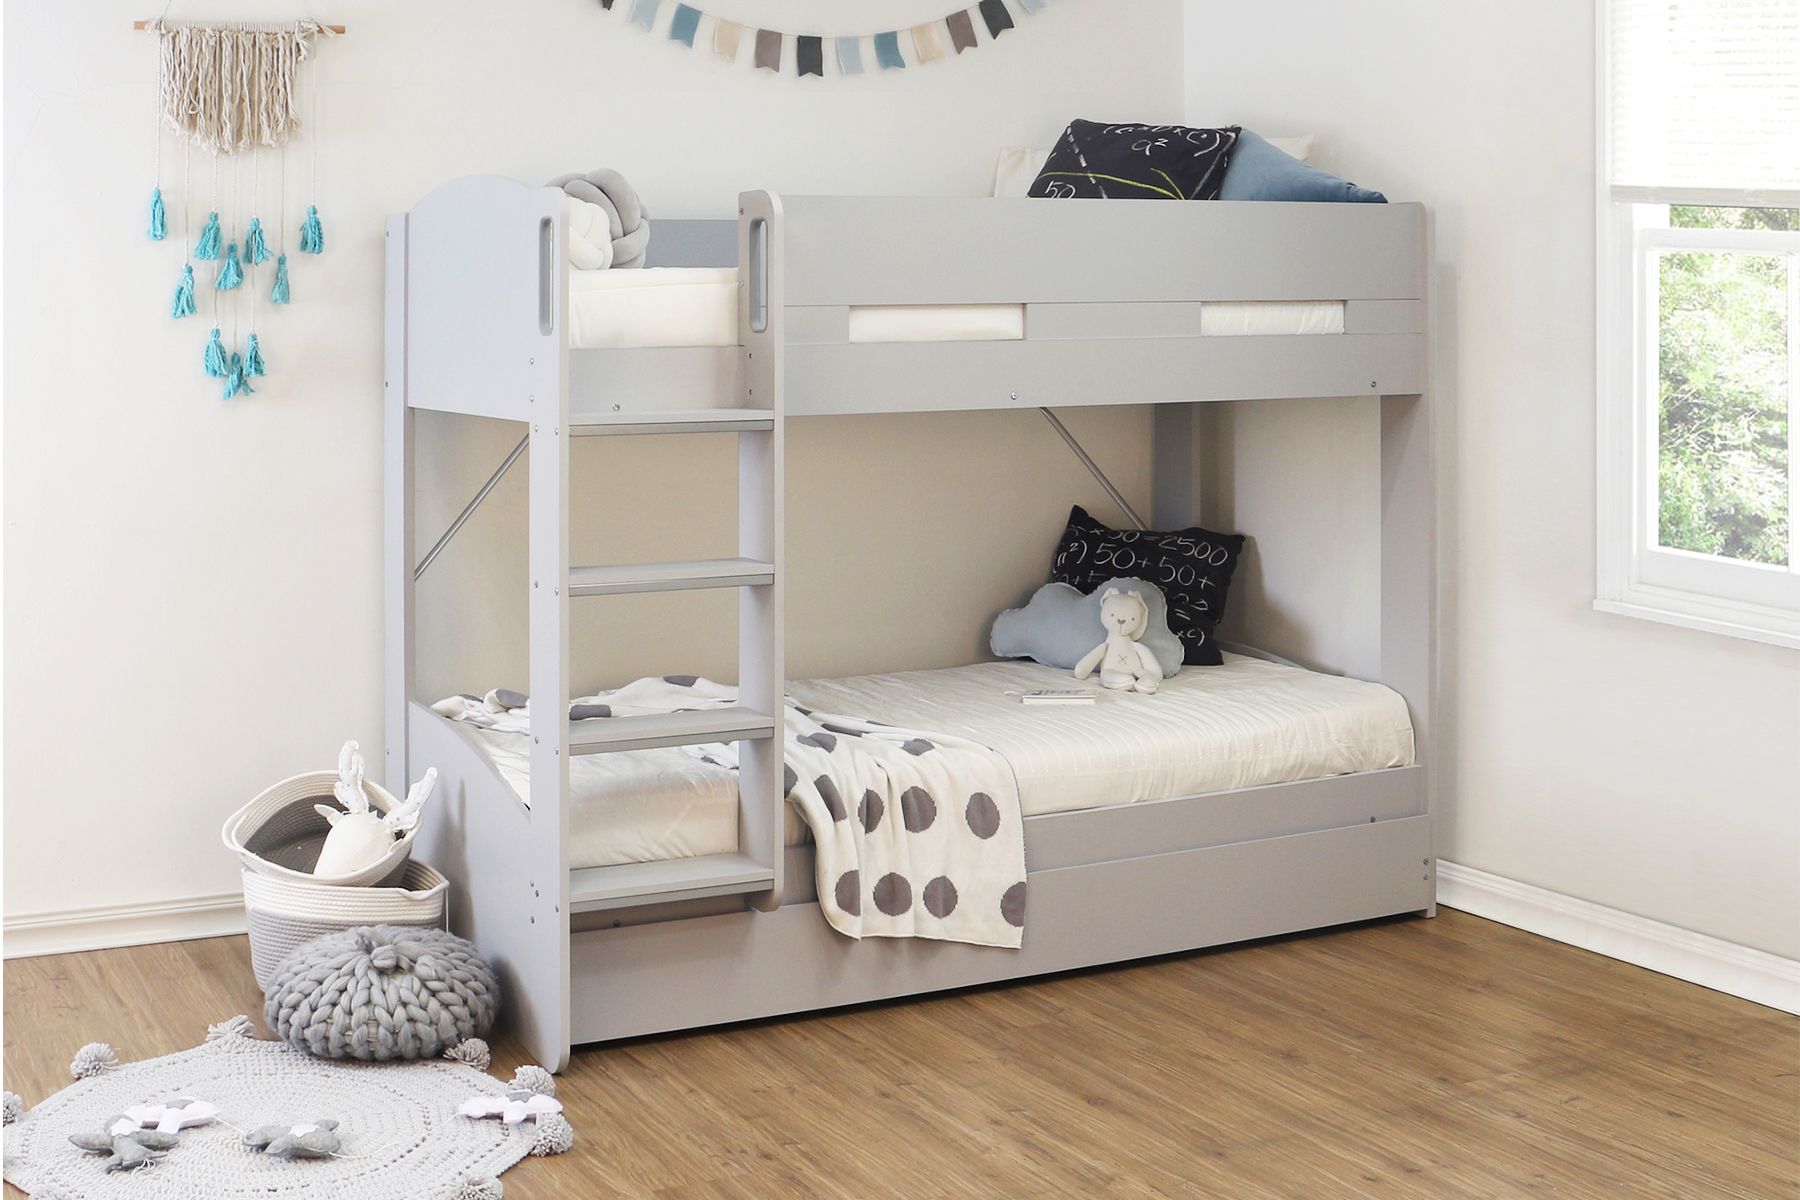 Flintshire Billie Wooden Bunk Bed With, Trundle Bunk Beds With Mattresses